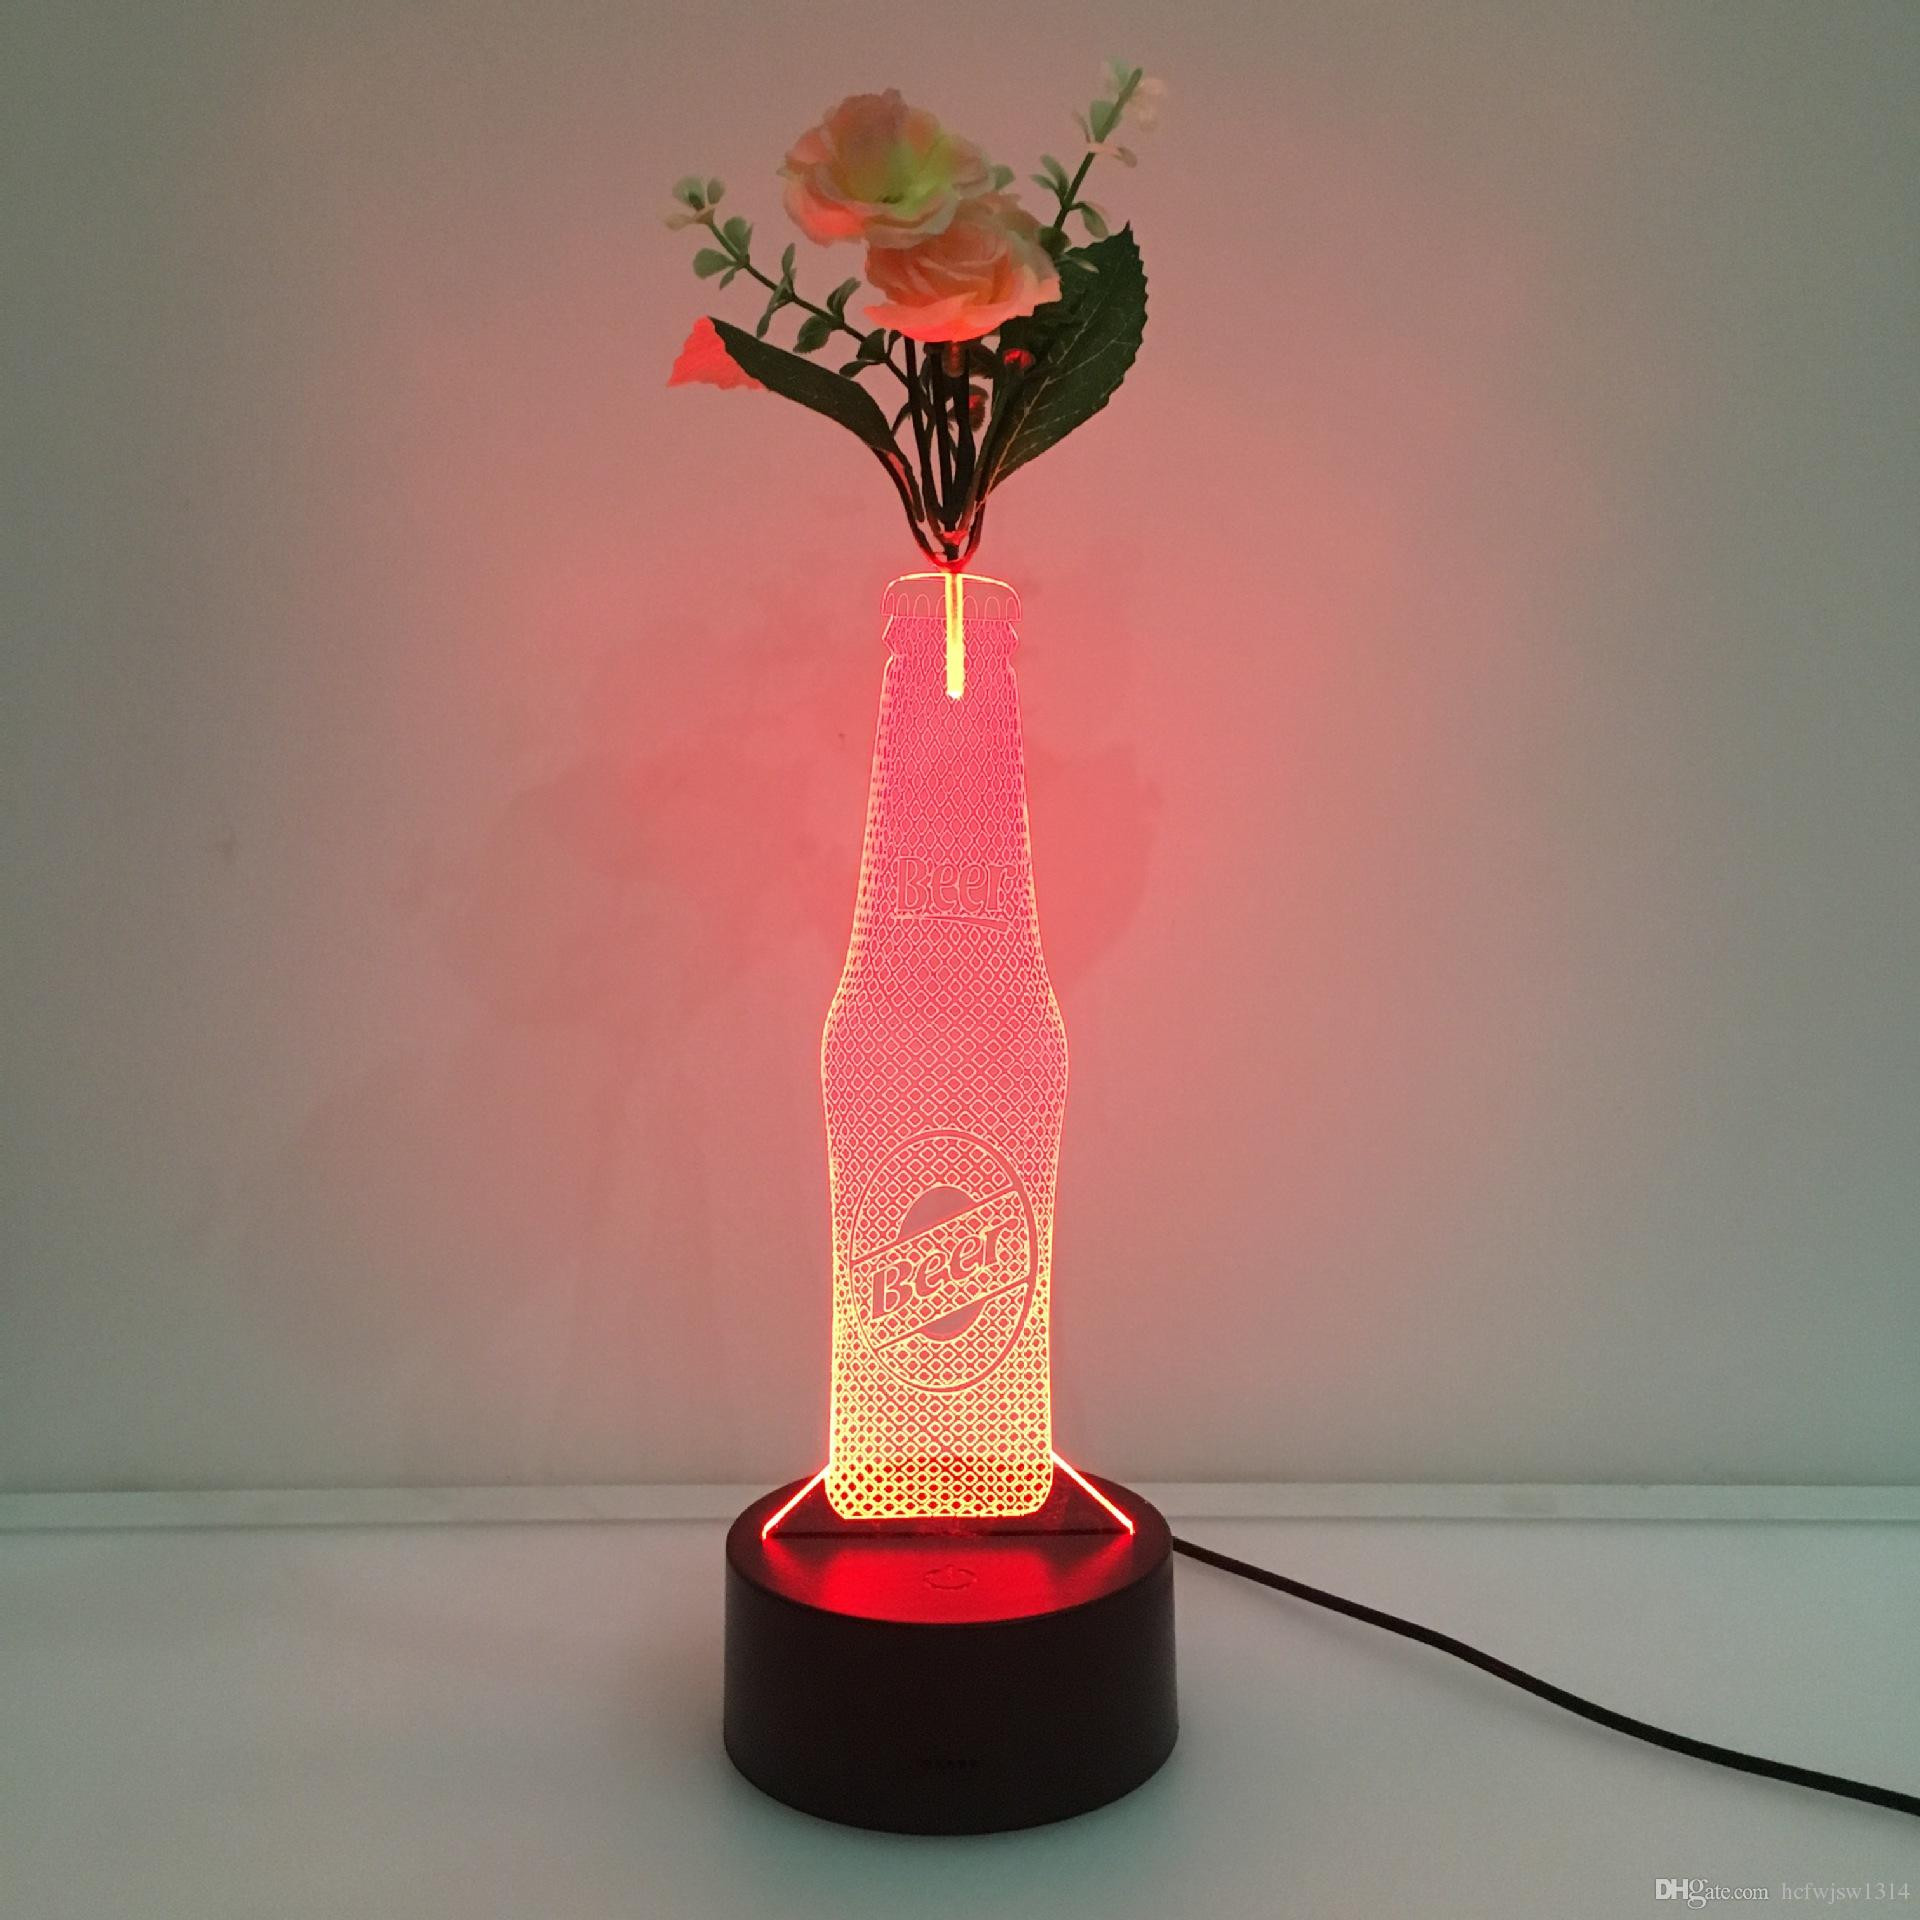 28 Spectacular Wine Bottle Vase 2024 free download wine bottle vase of new wine bottle led vase stereo light colorful acrylic 3d night with new wine bottle led vase stereo light colorful acrylic 3d night light gift table lamp